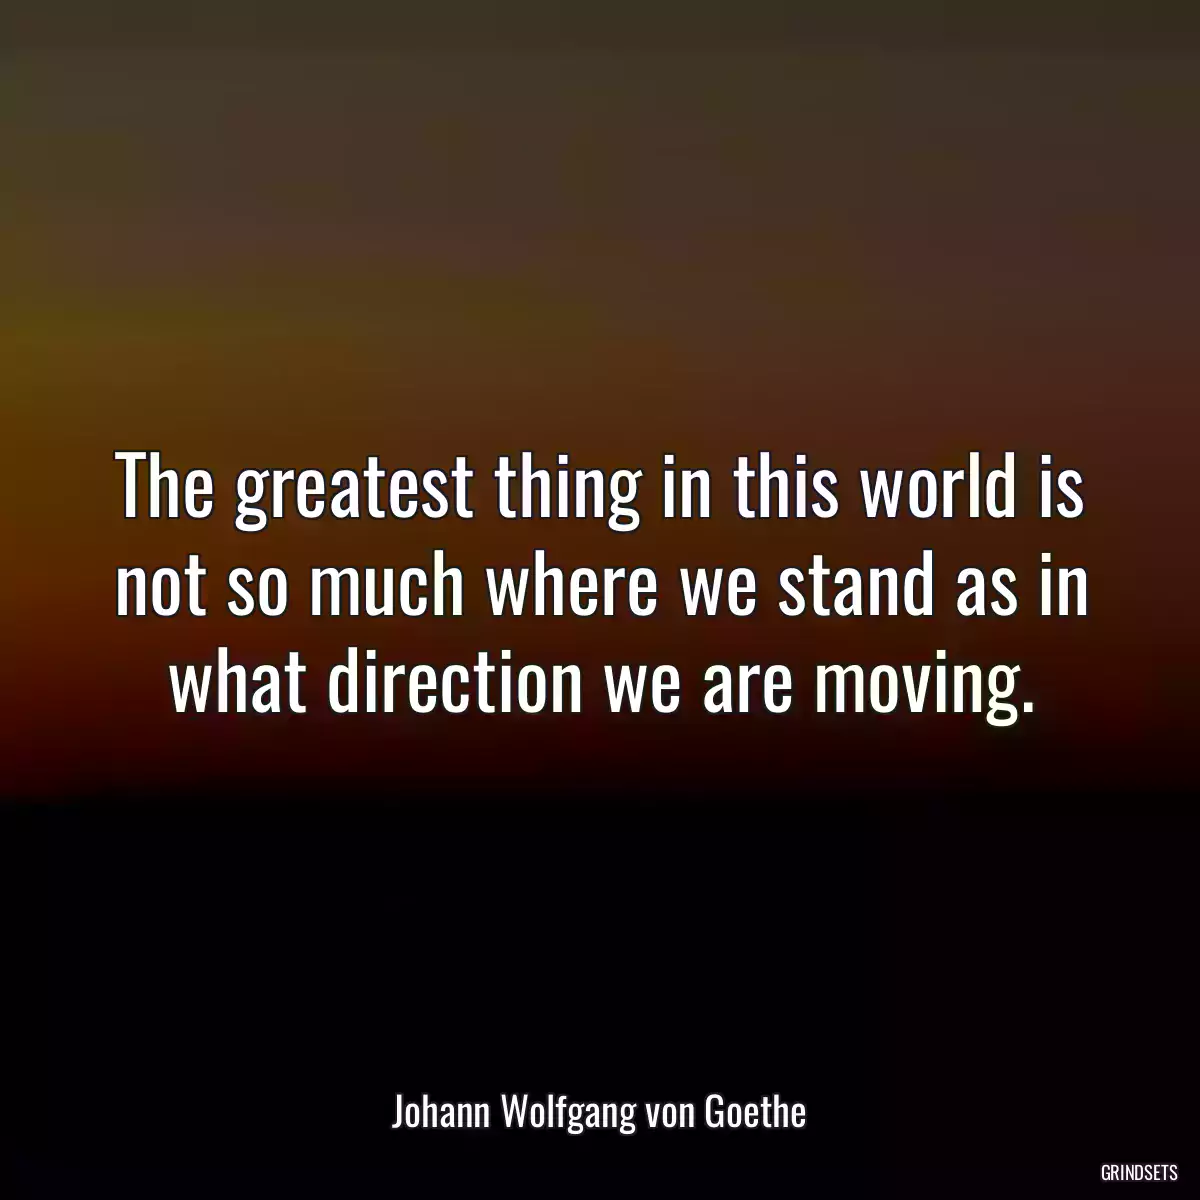 The greatest thing in this world is not so much where we stand as in what direction we are moving.